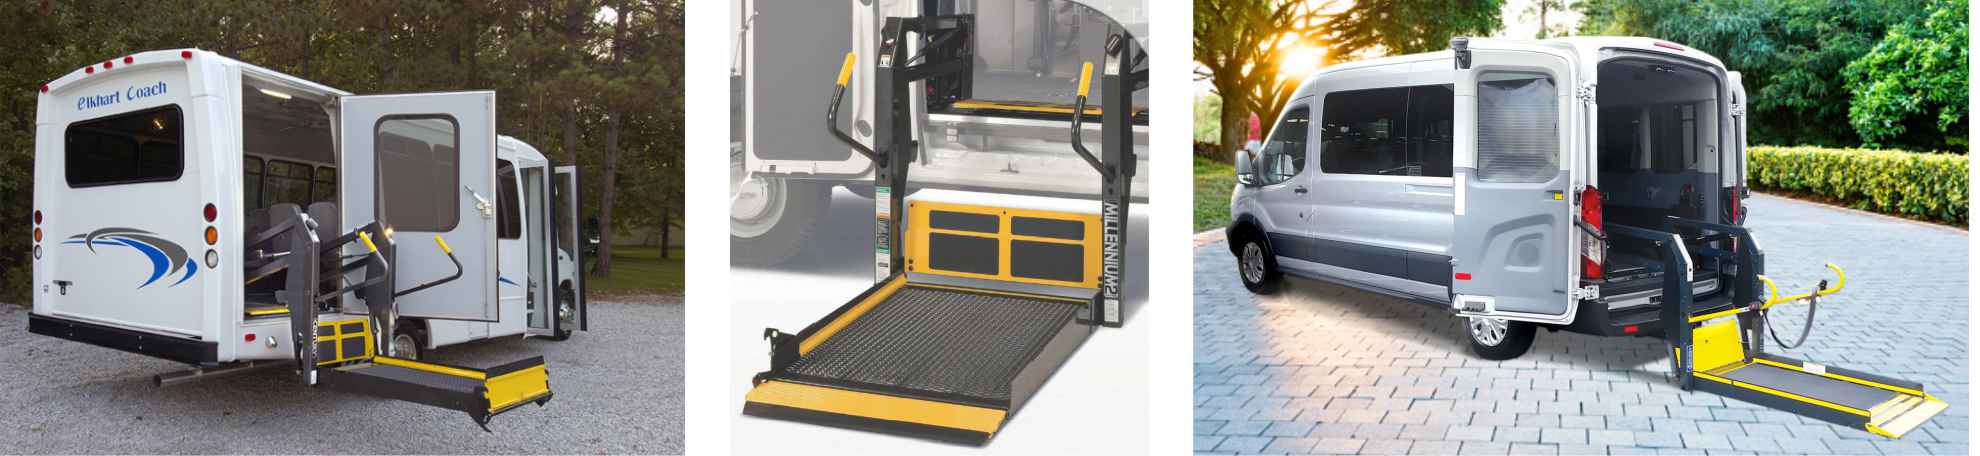 Photos of commercial wheelchair lifts installed in vehicles